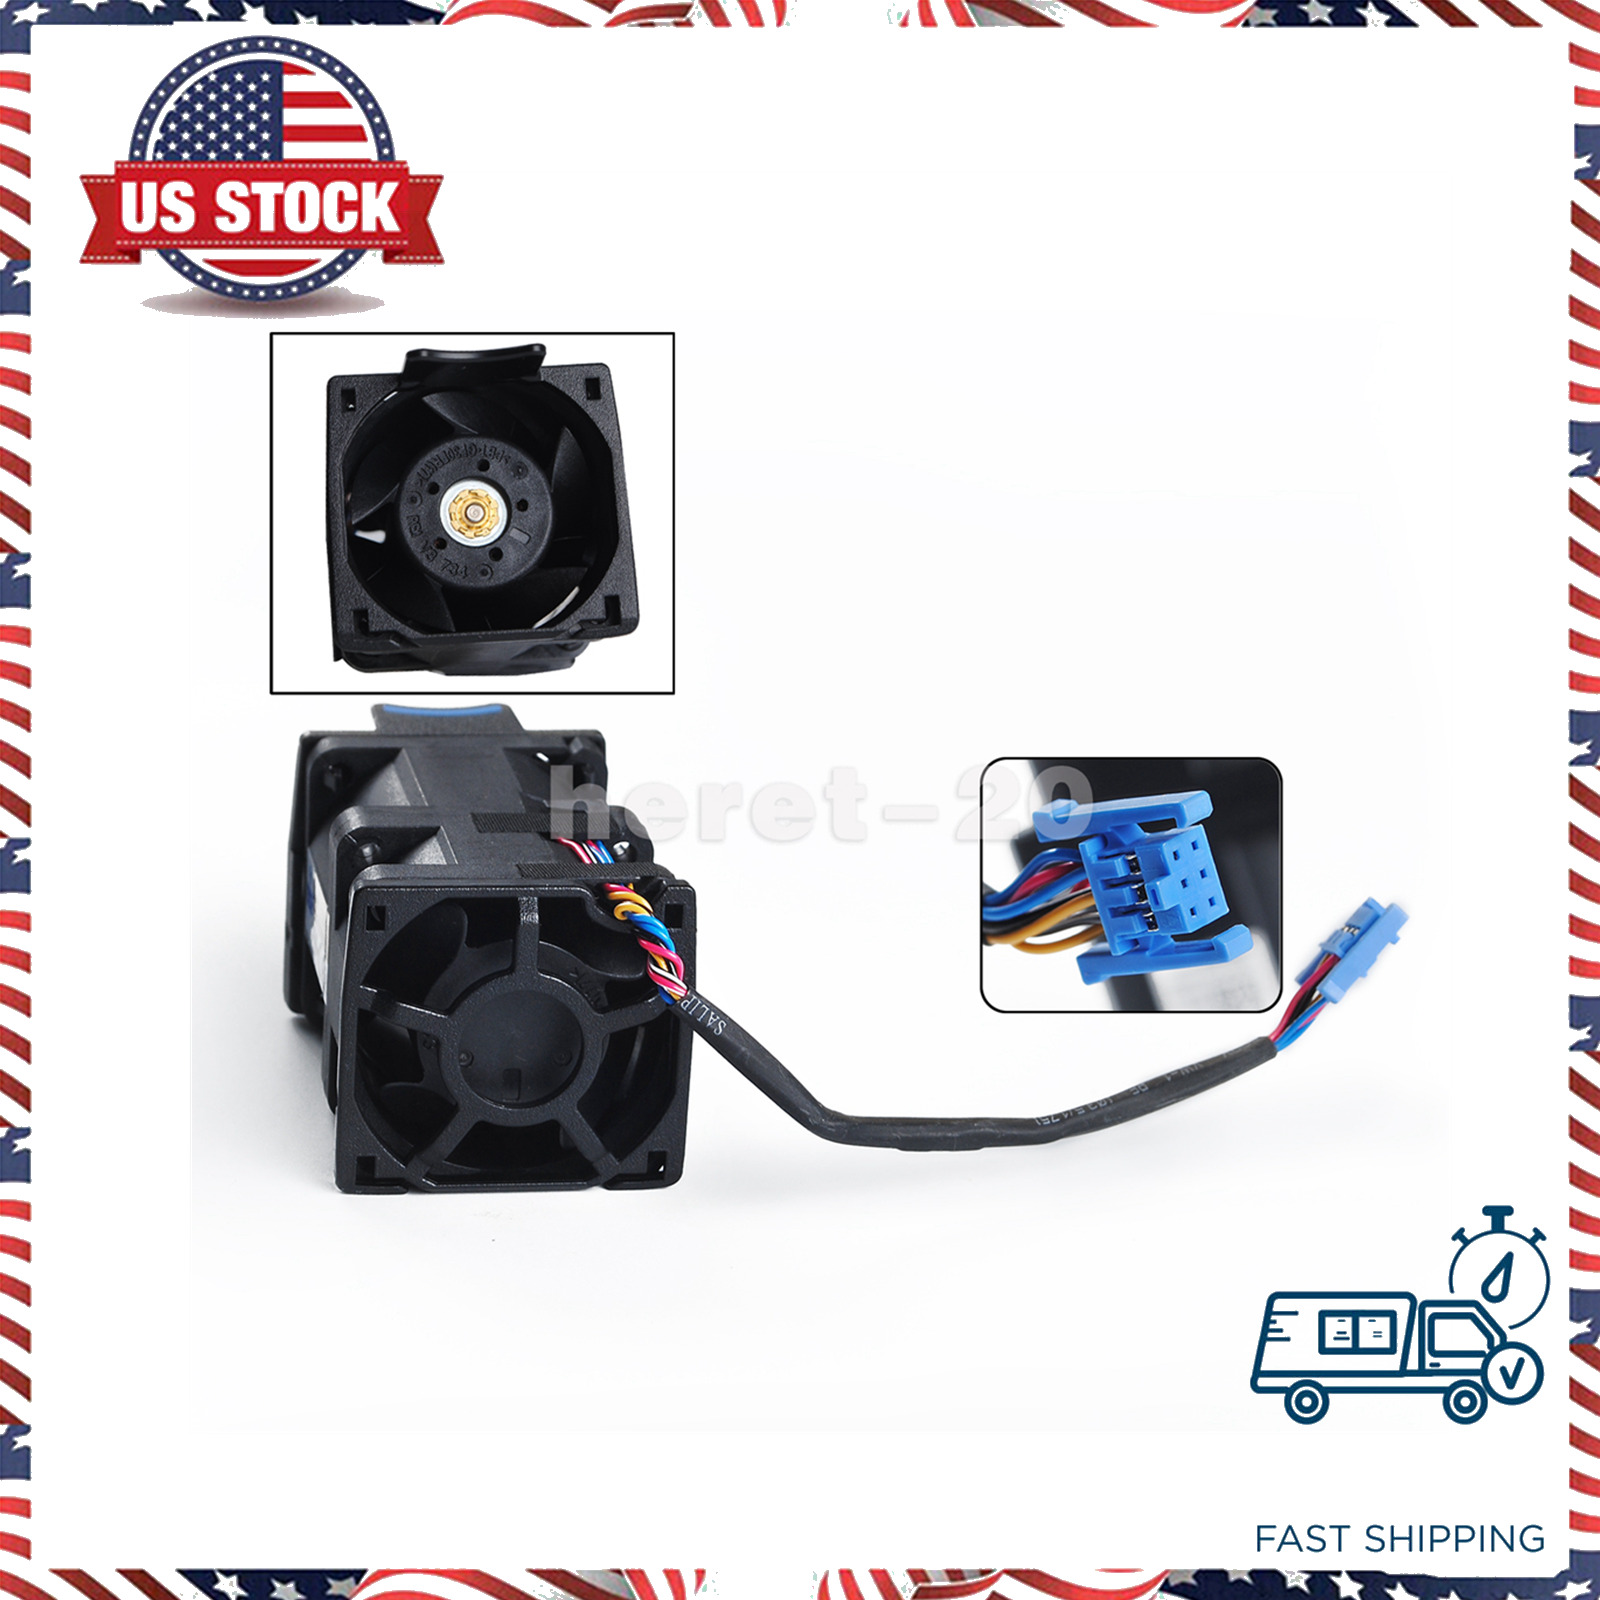 New Server Cooling Fan for Dell PowerEdge R440 NW0CG 0NW0CG US Shipping